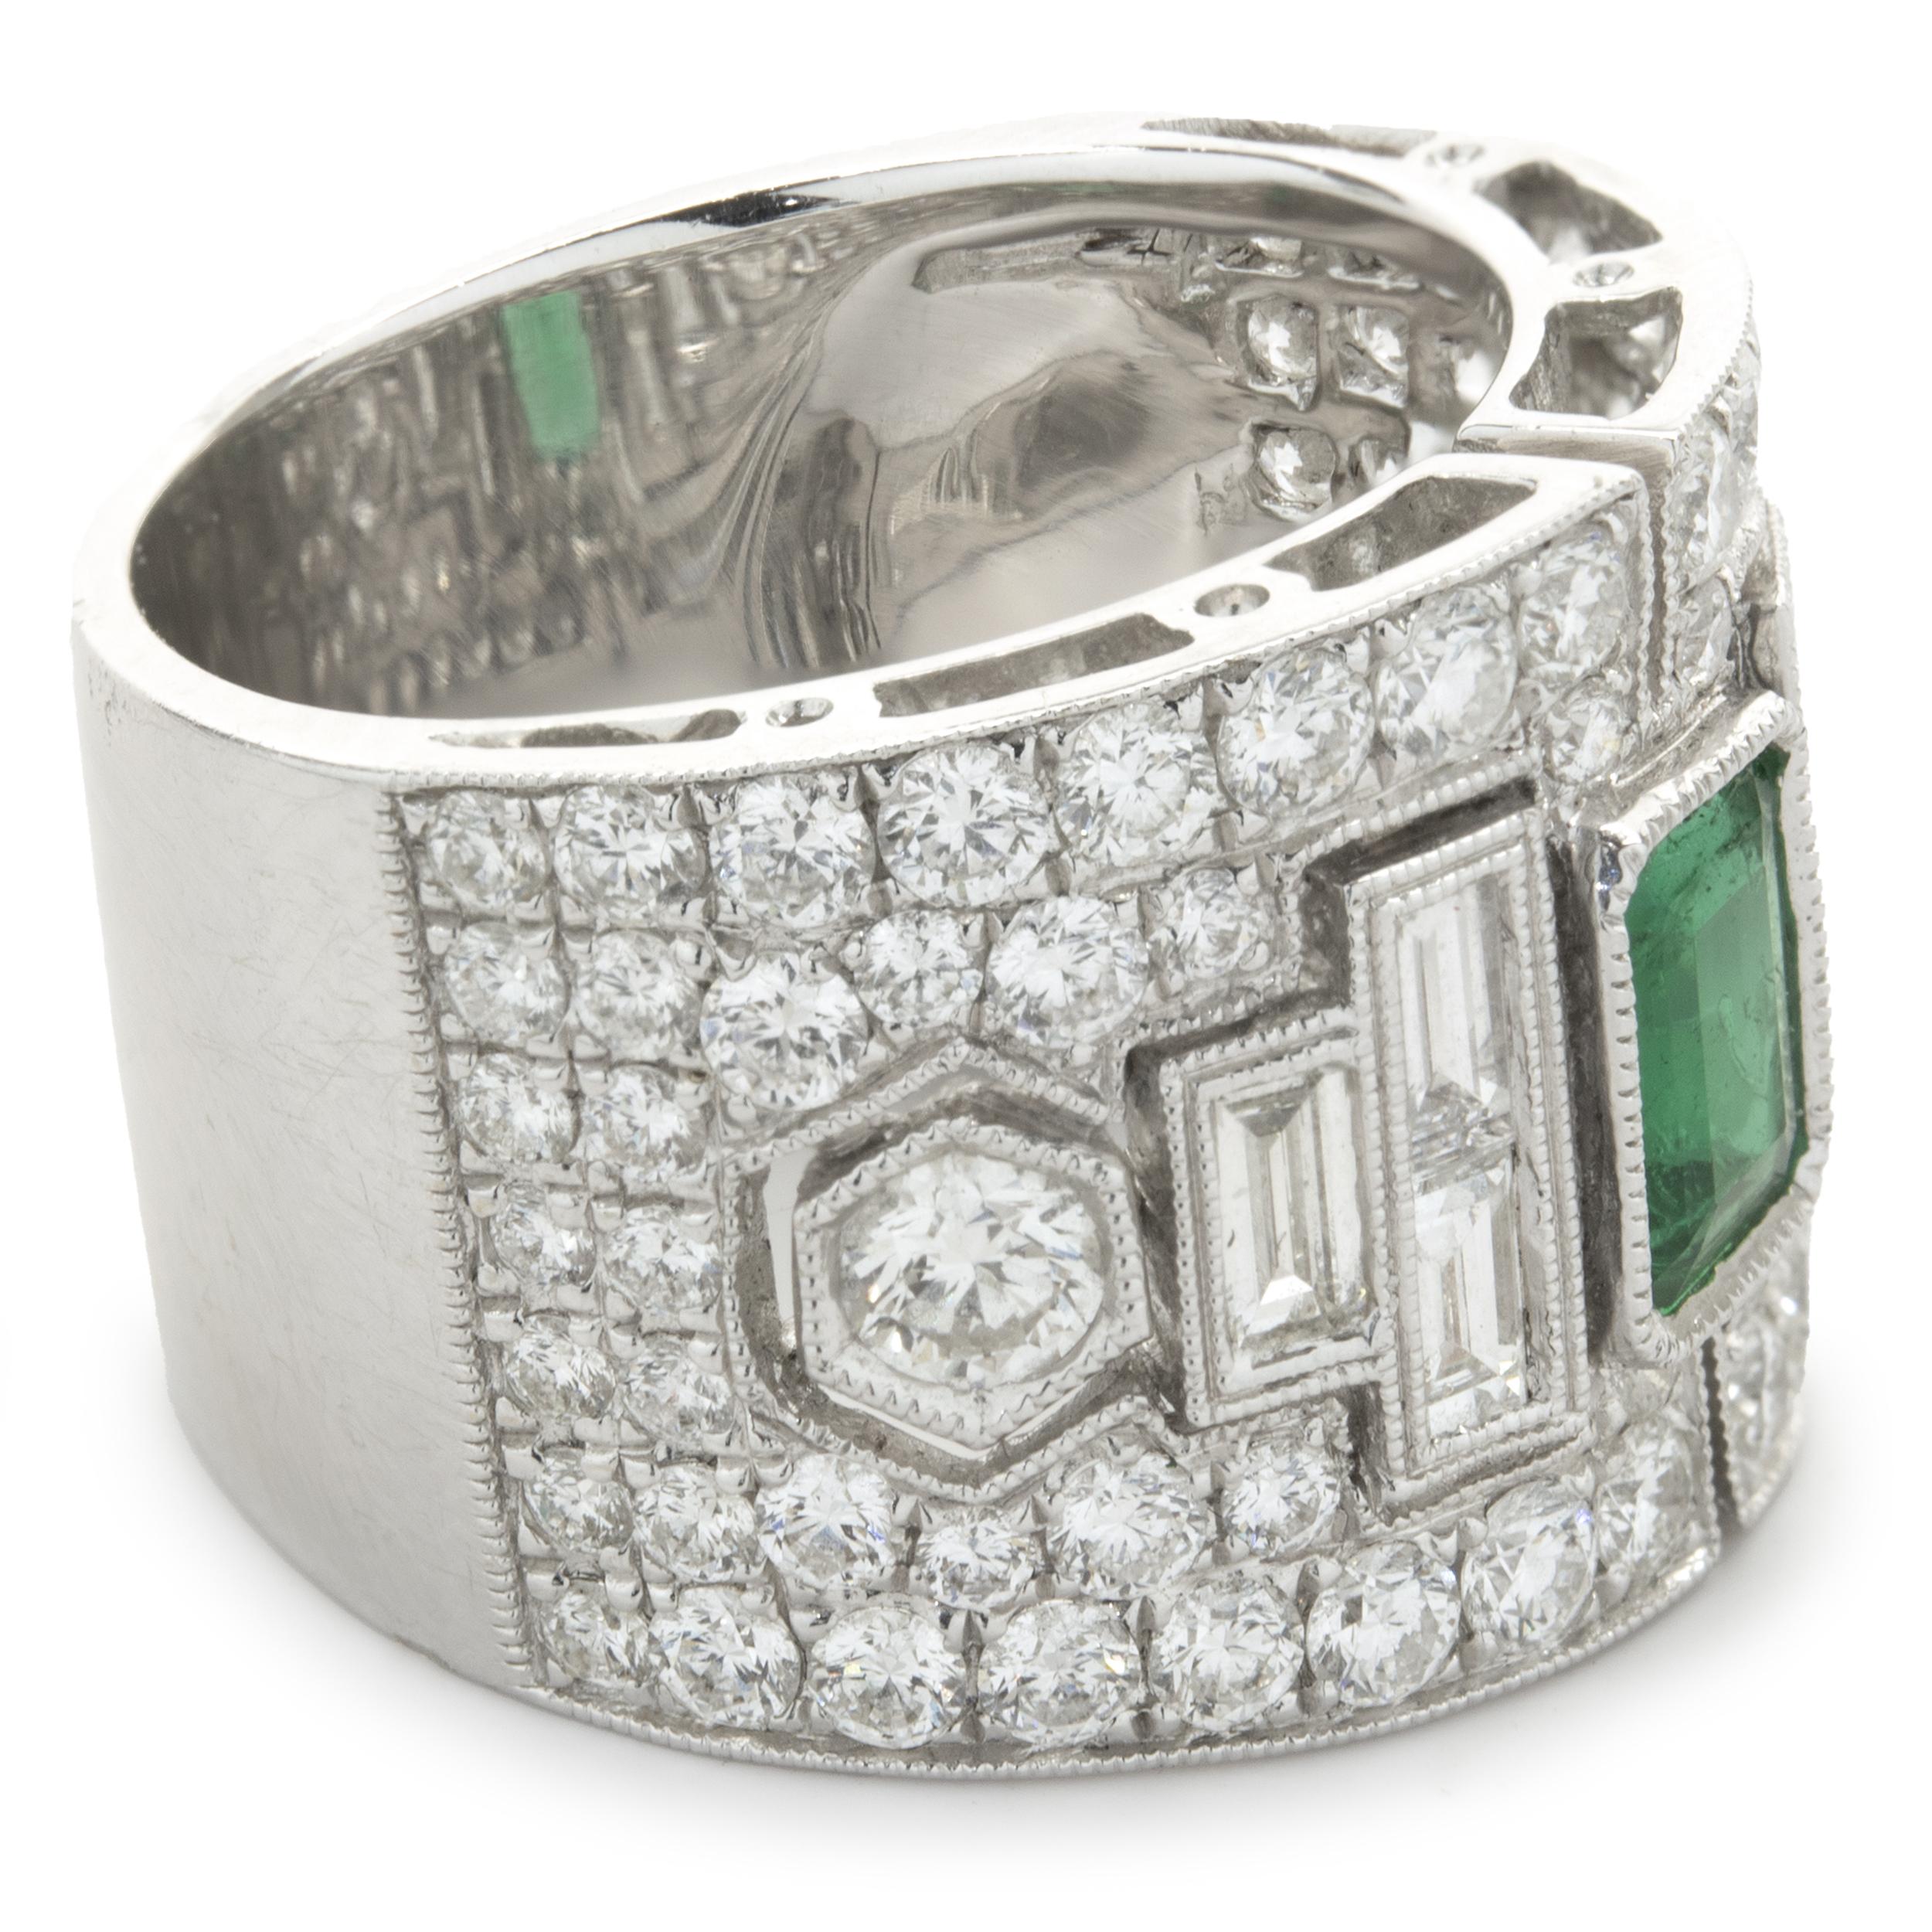 Designer: custom
Material: 18K white gold
Emerald: 1 emerald cut = 0.65ct
Color: Kelly Green
Clarity: AA
Diamond: 74 round brilliant cut = 2.14cttw
Color: G
Clarity: VS2
Diamond: 6 baguette cut = .65cttw
Color: G
Clarity: SI1
Dimensions: ring top